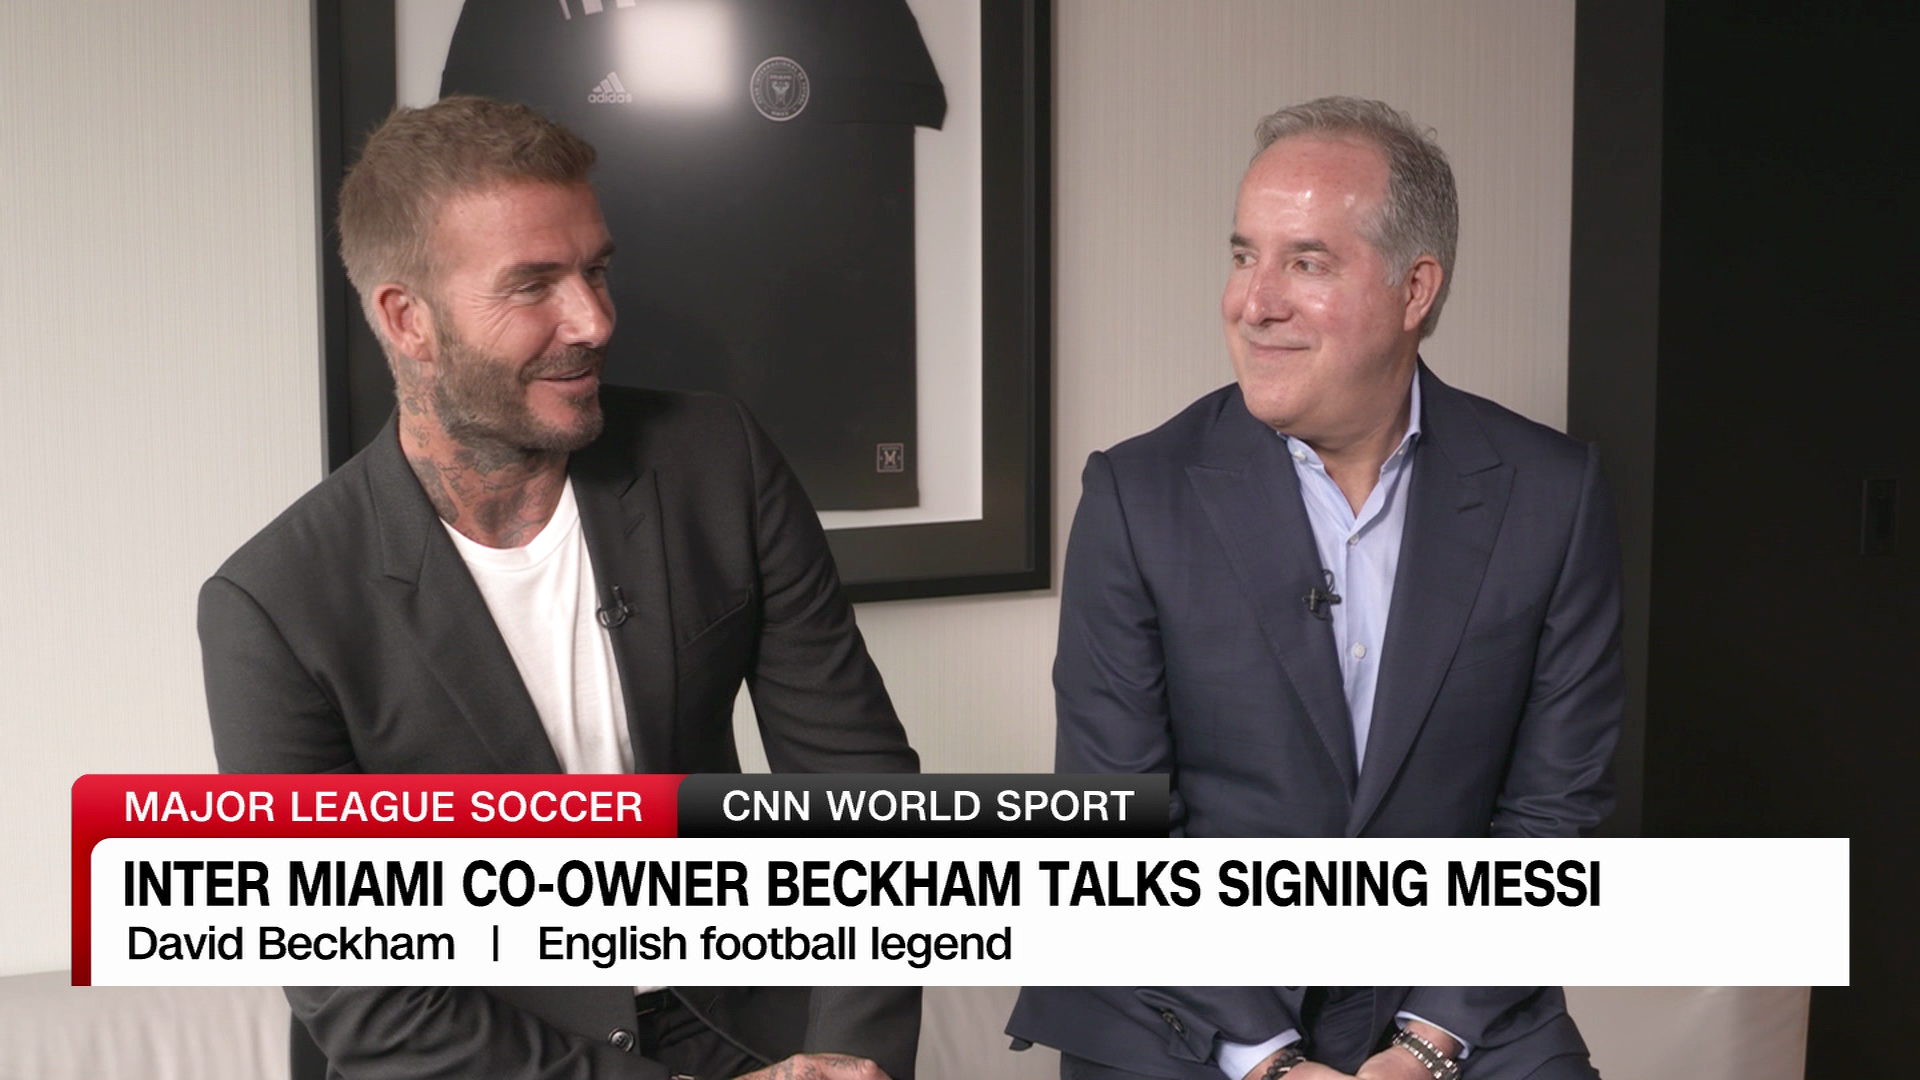 David Beckham speaks out on Manchester United owners and what they